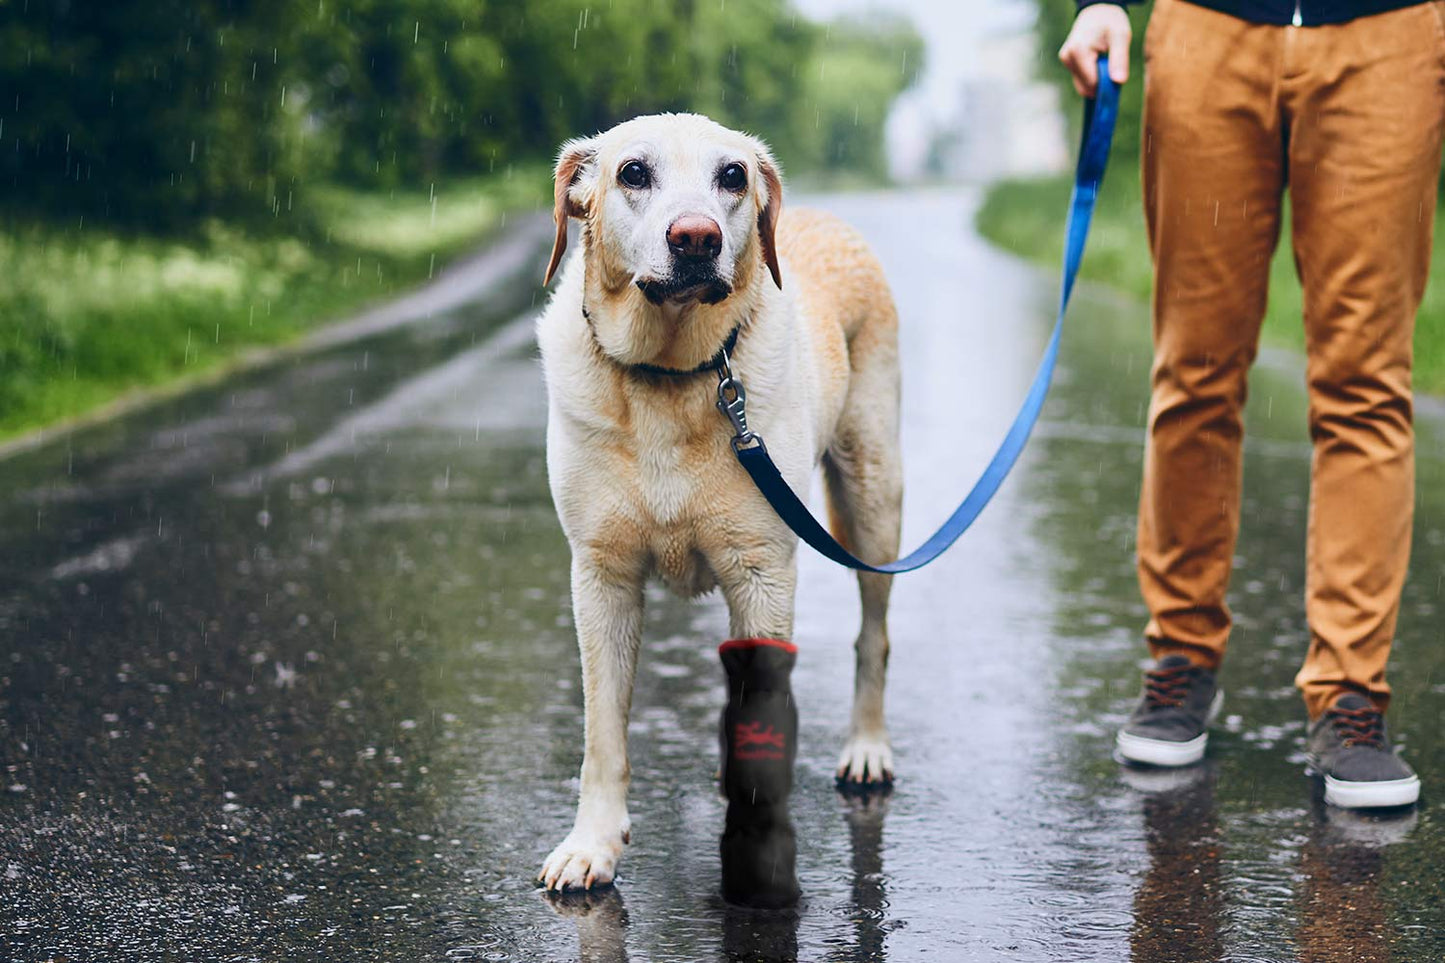 A dog walking on a leash in the rain while wearing MediPaw: Rugged X-Boot boots by Your Whole Dog.